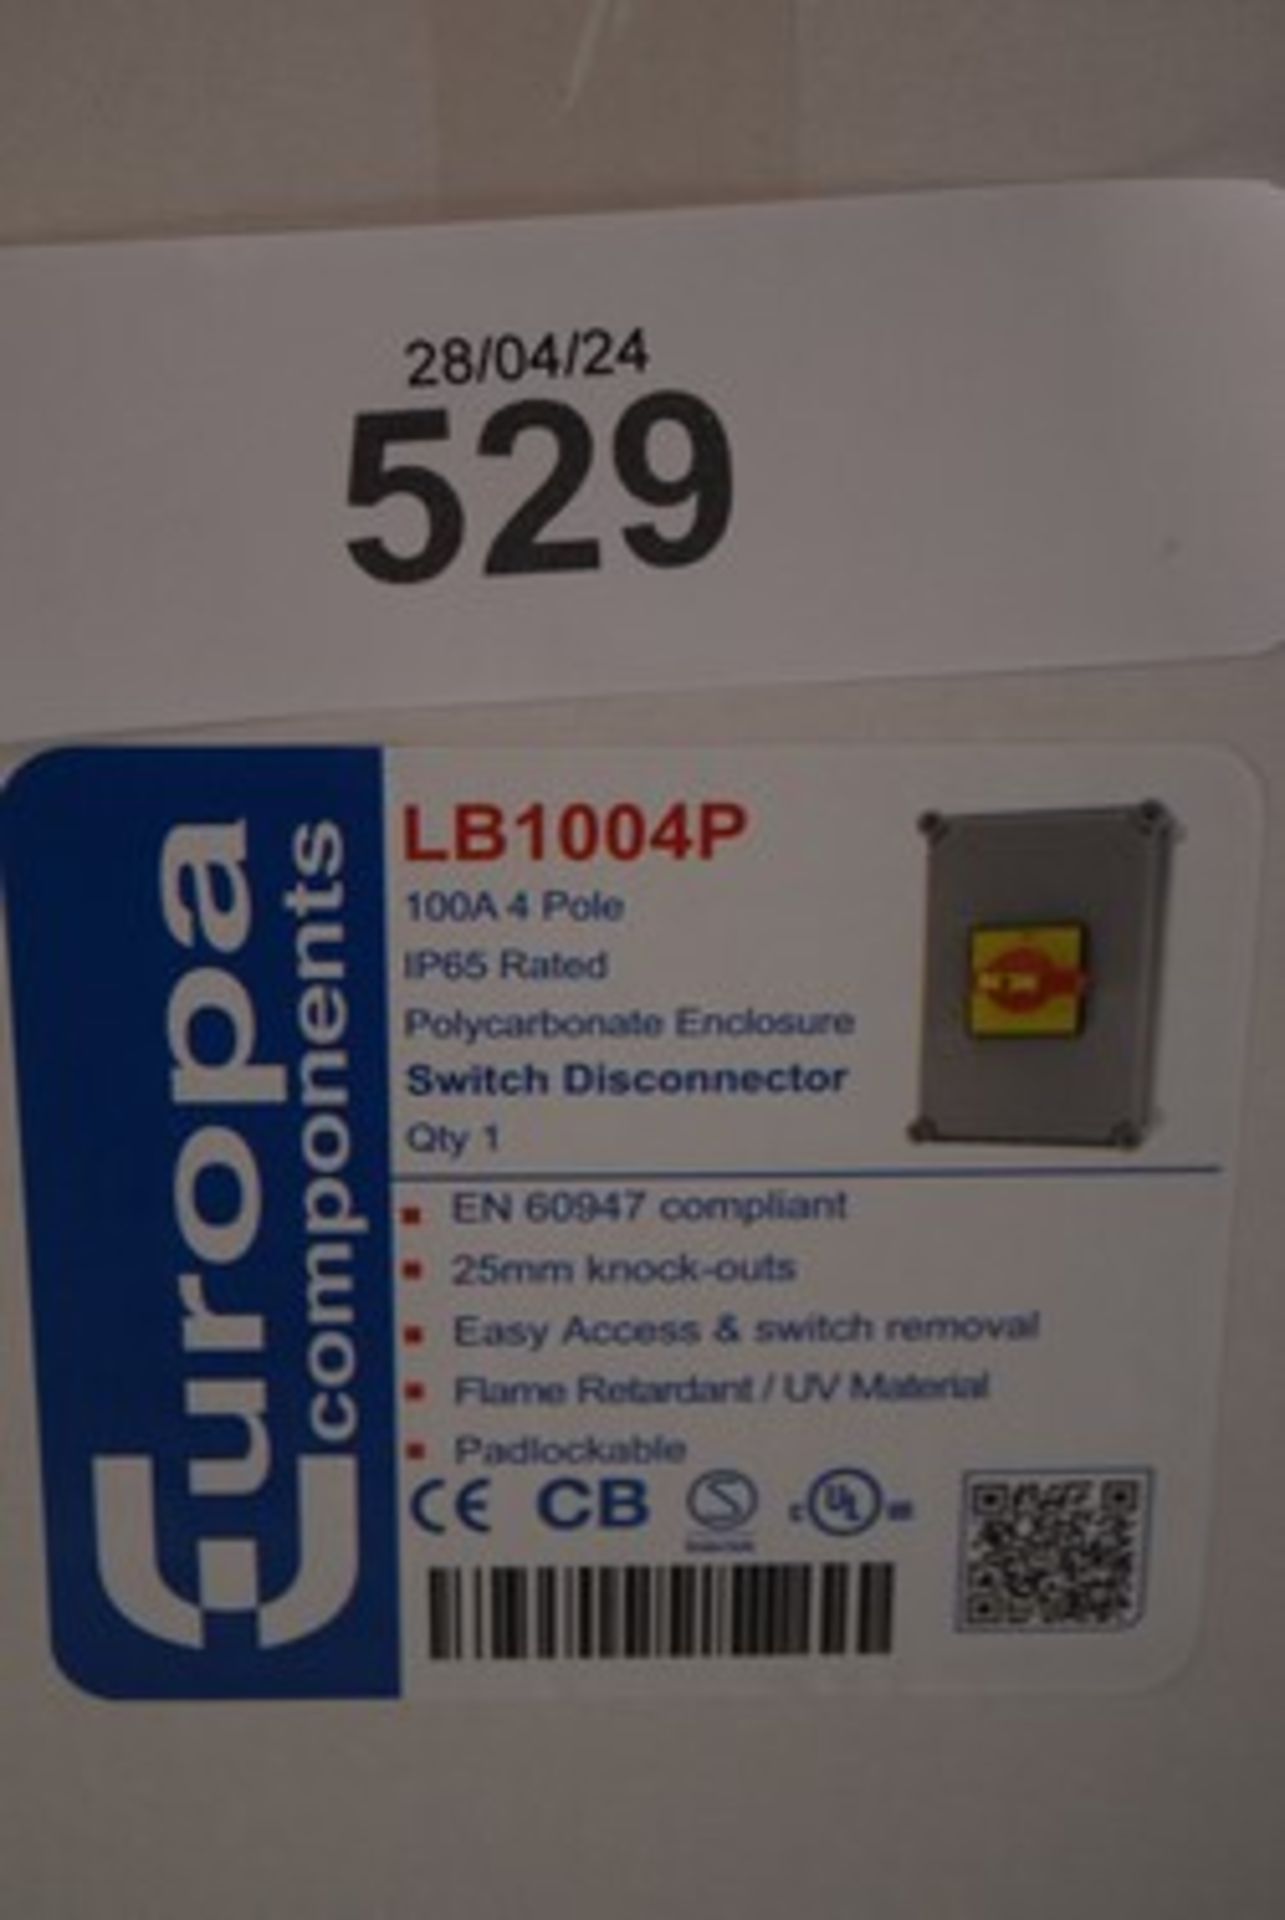 5 x Europa rotary isolator, 4 pole, 100amp, item No: LB1004P - new in box (GS28C) - Image 2 of 2